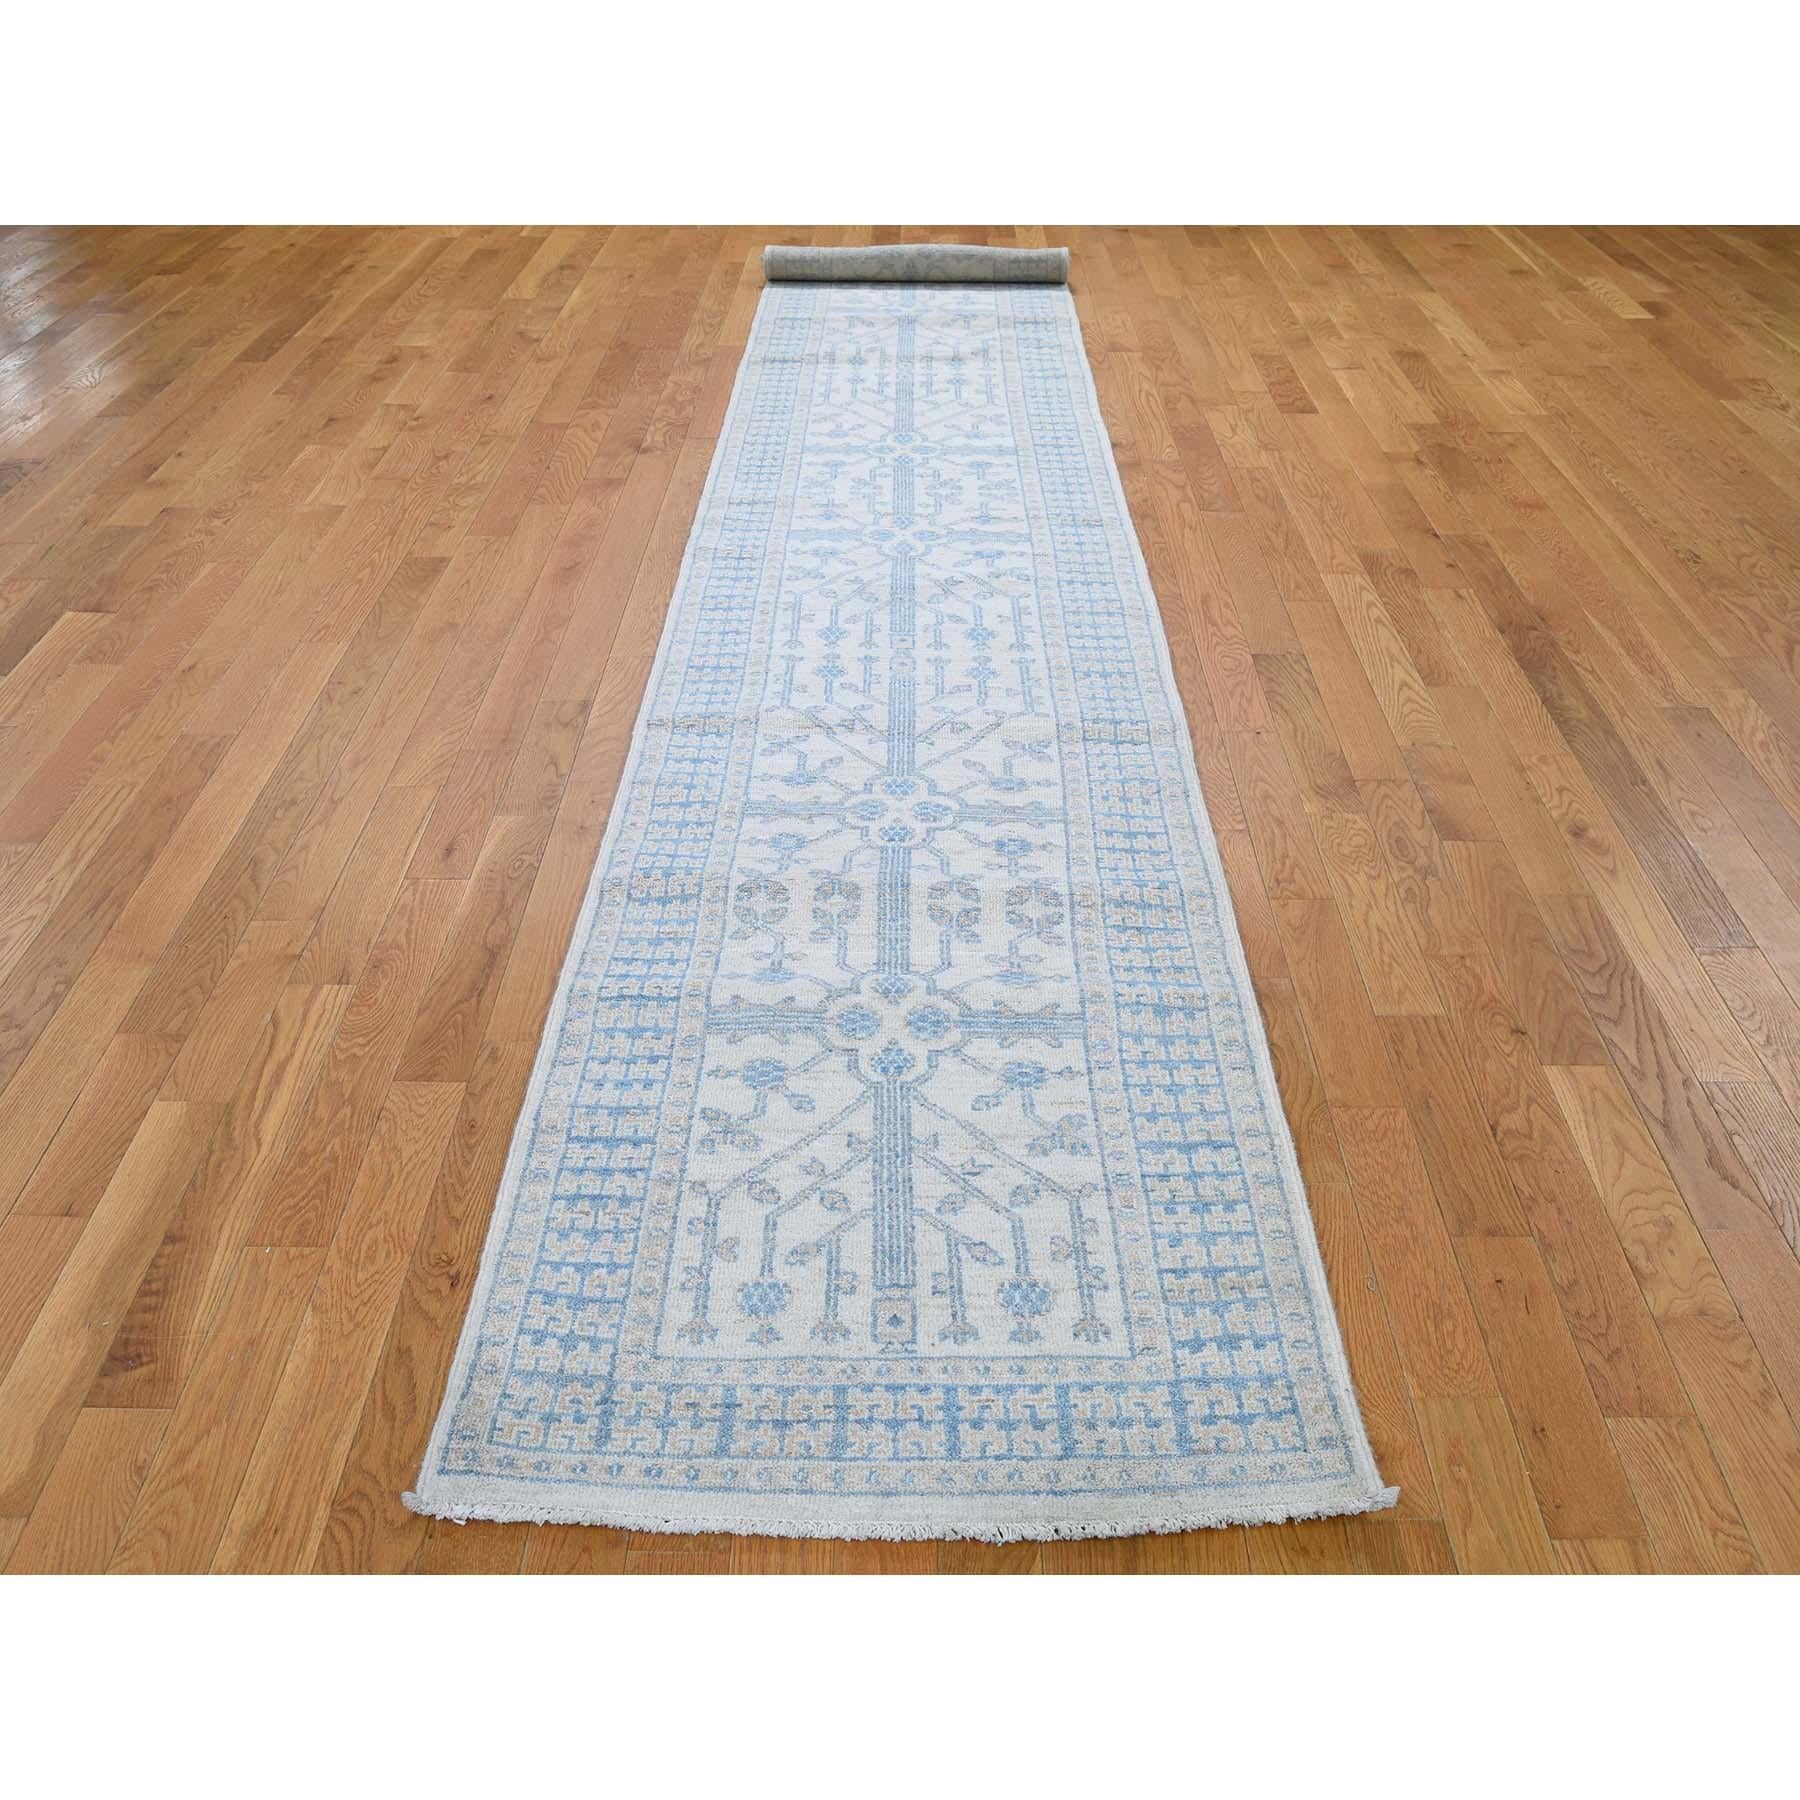 Afghan White Wash Khotan with Pomegranate Design Runner Hand Knotted Rug